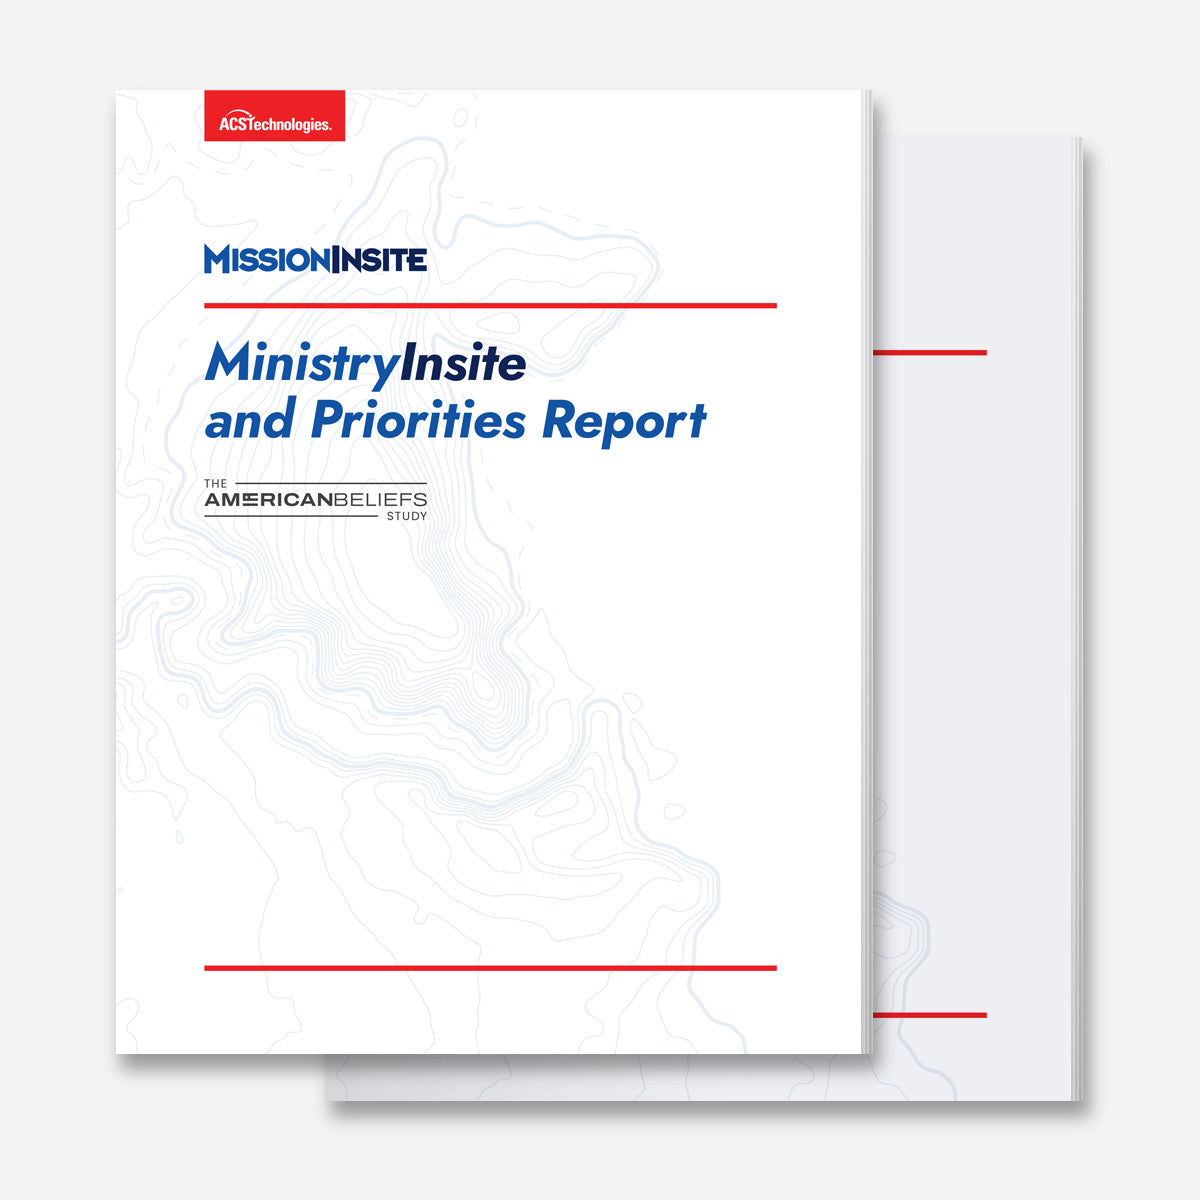 MinistryInsite and Priorities Report